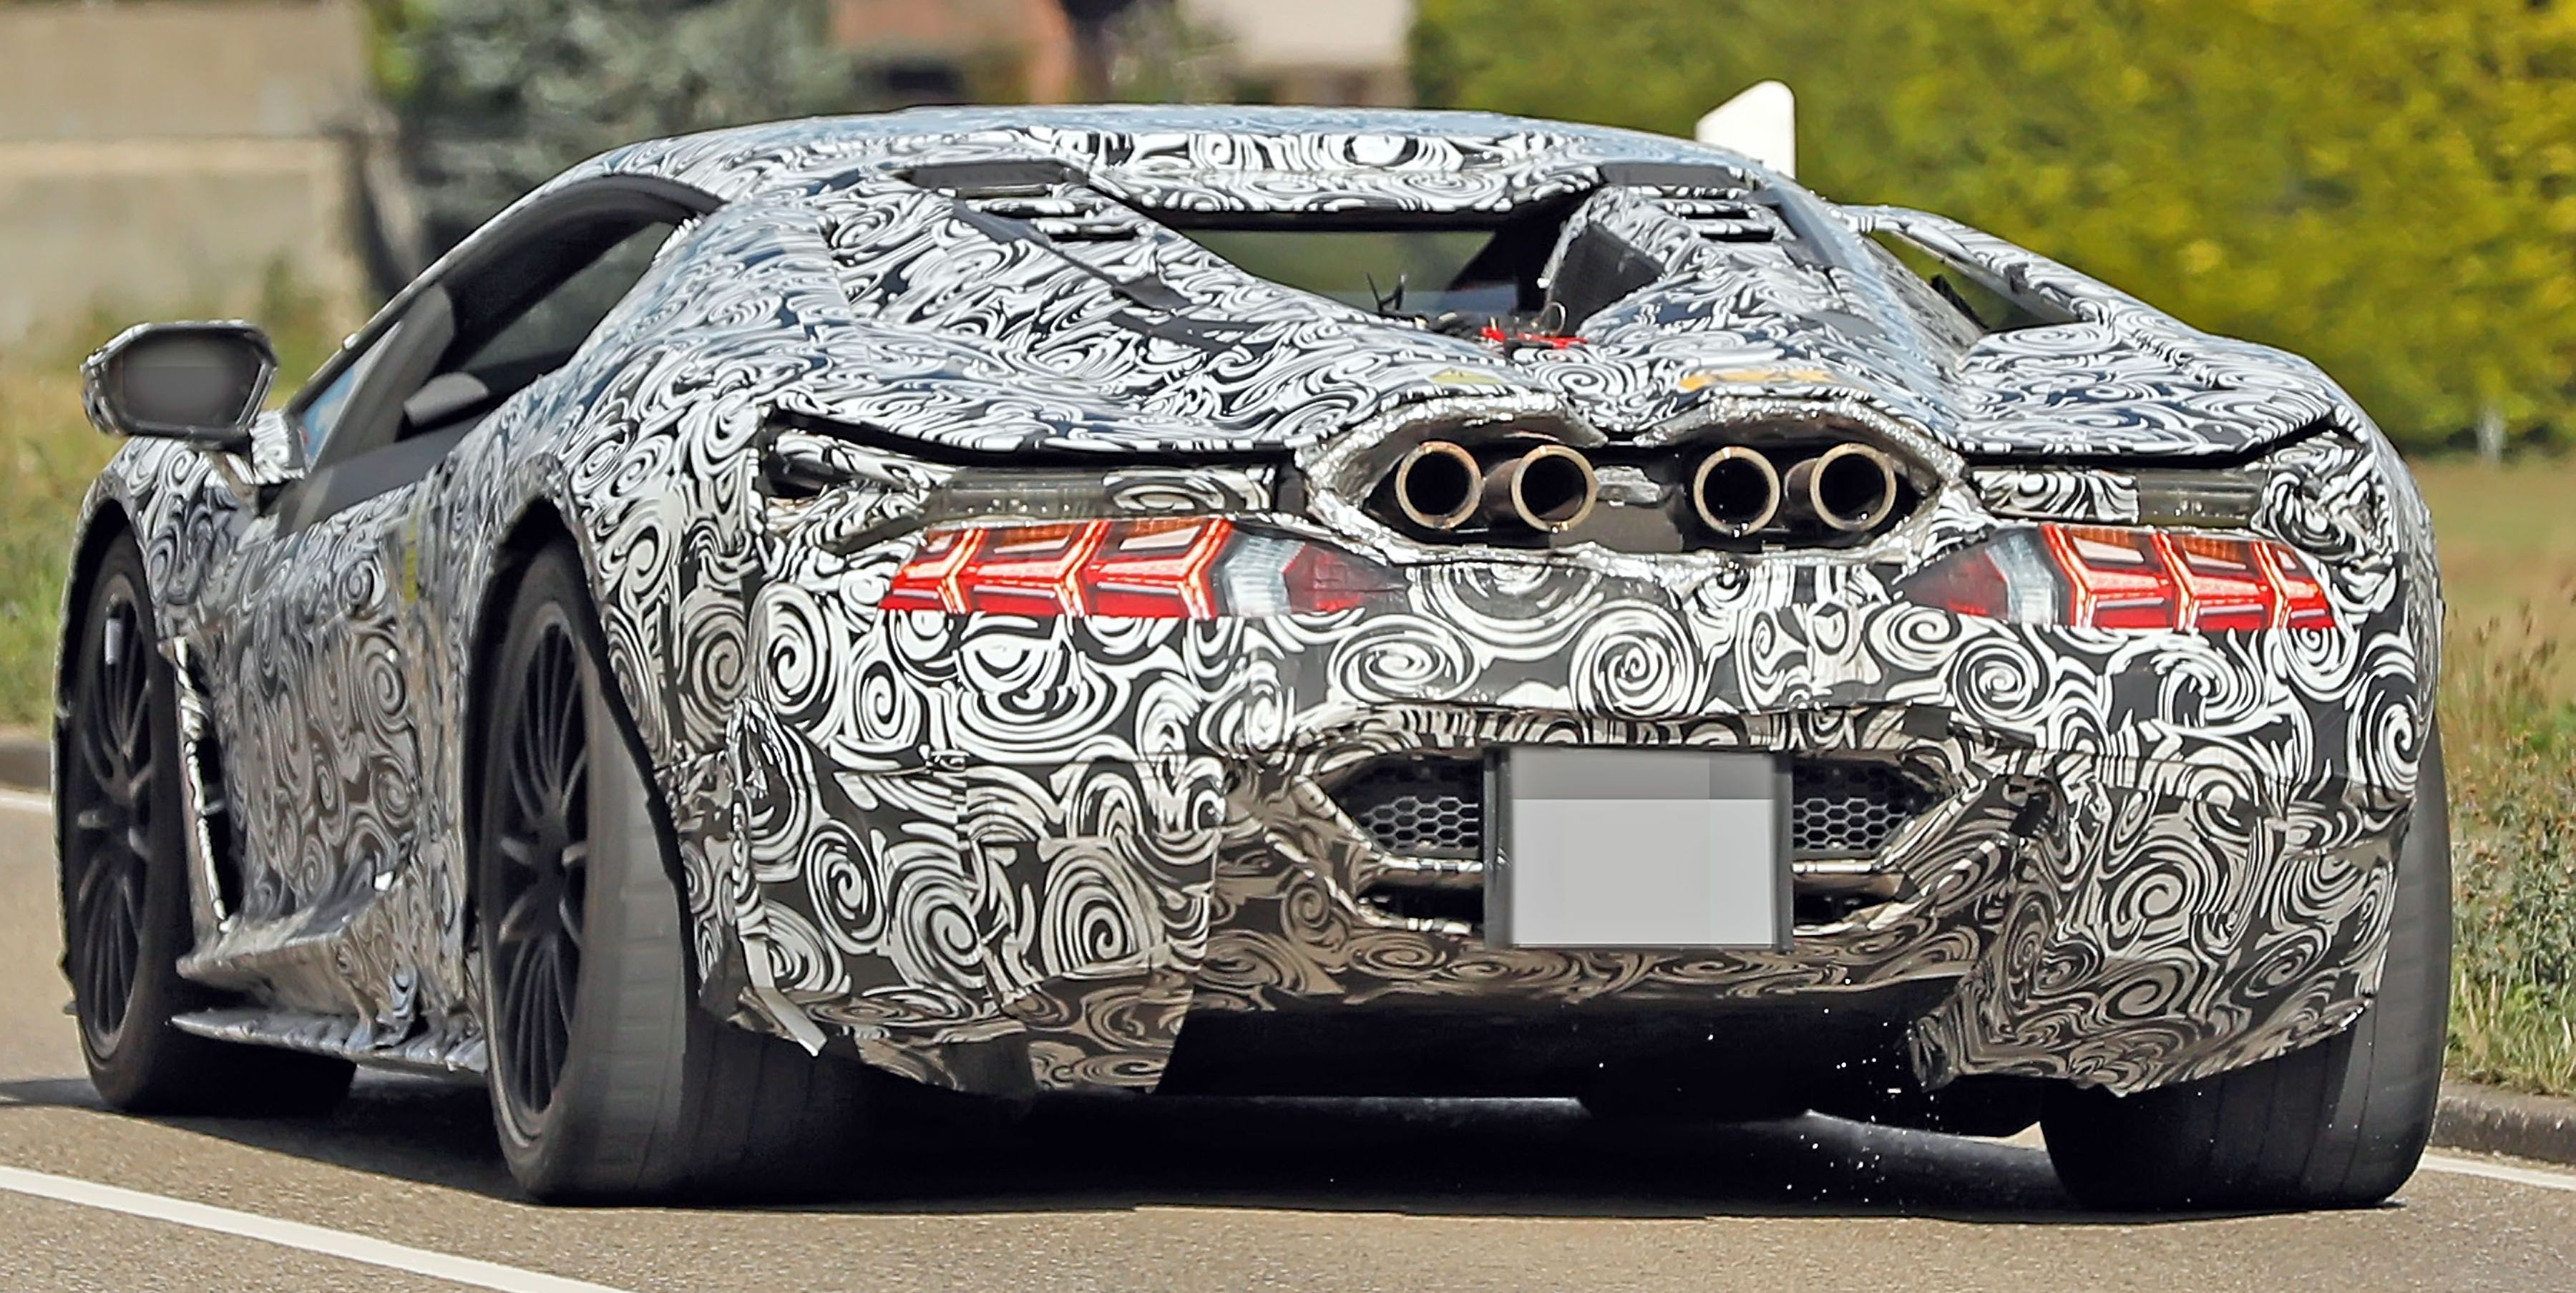 Aventador Replacement Reportedly Breaks Down on the Side of the Road, Spy Photographers Go Wild